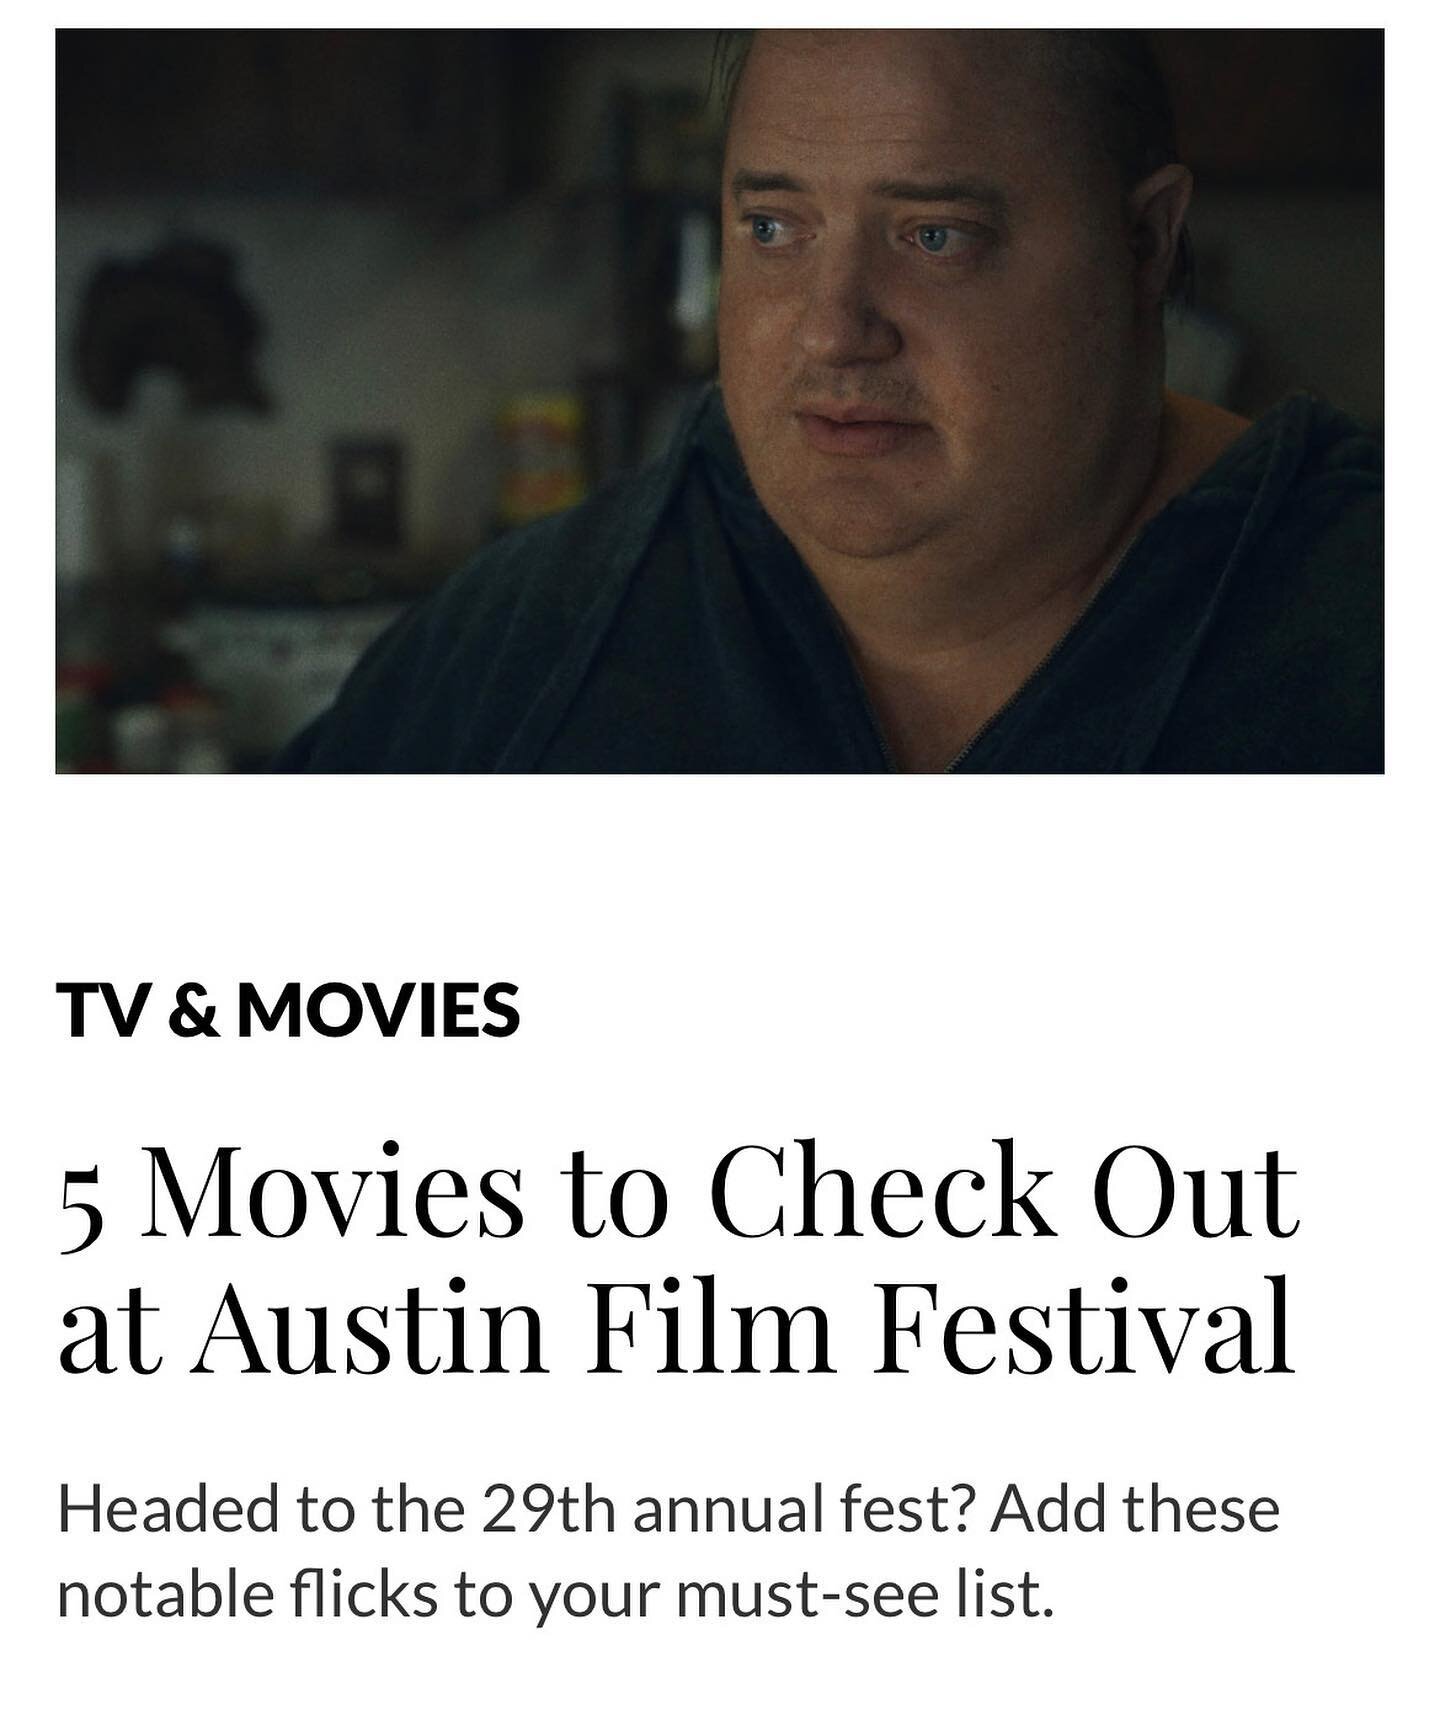 Austin Monthly just featured us! Five films to check out at Austin Film Festival. In the same leagues as Darren Aronofsky and Dustin Hoffman! Thanks @austin_monthly